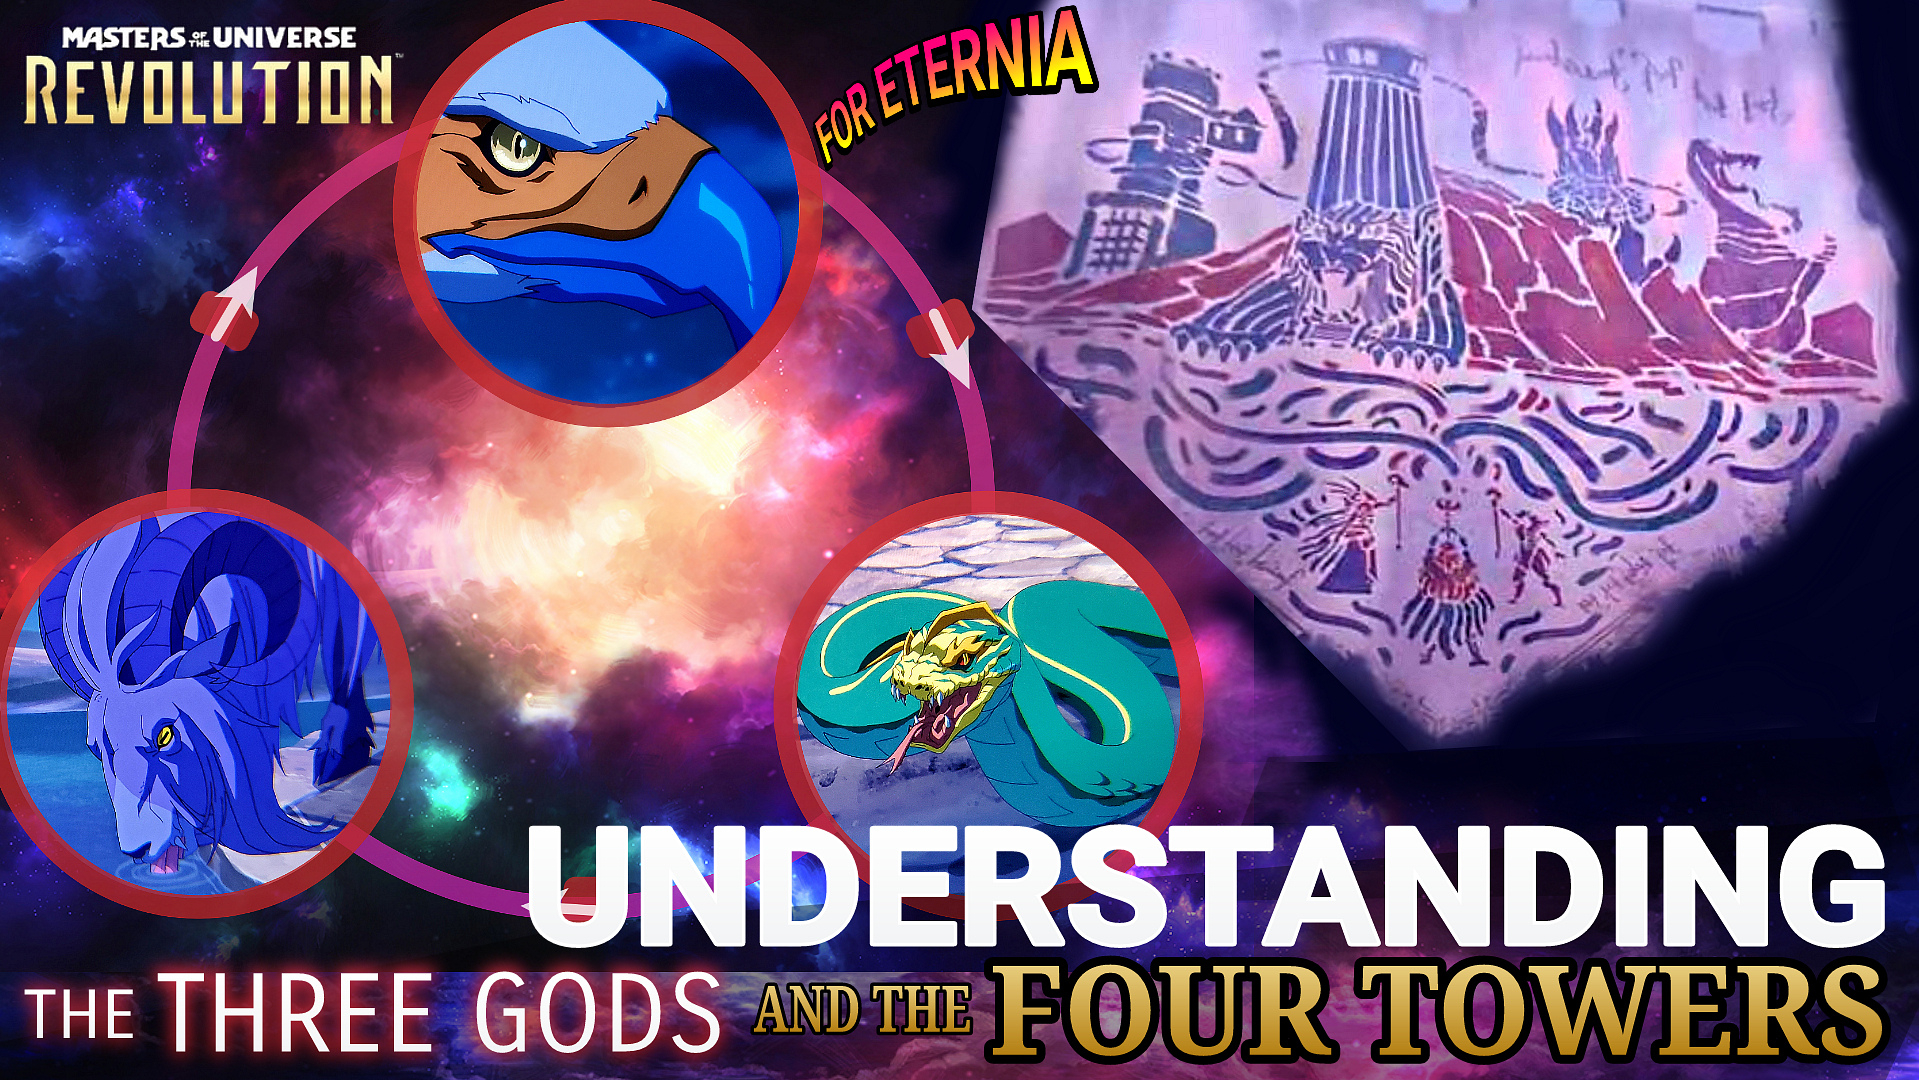 EXPLAINED: The Three Gods and Four Towers of Preternia in ”Masters of the Universe: Revolution”